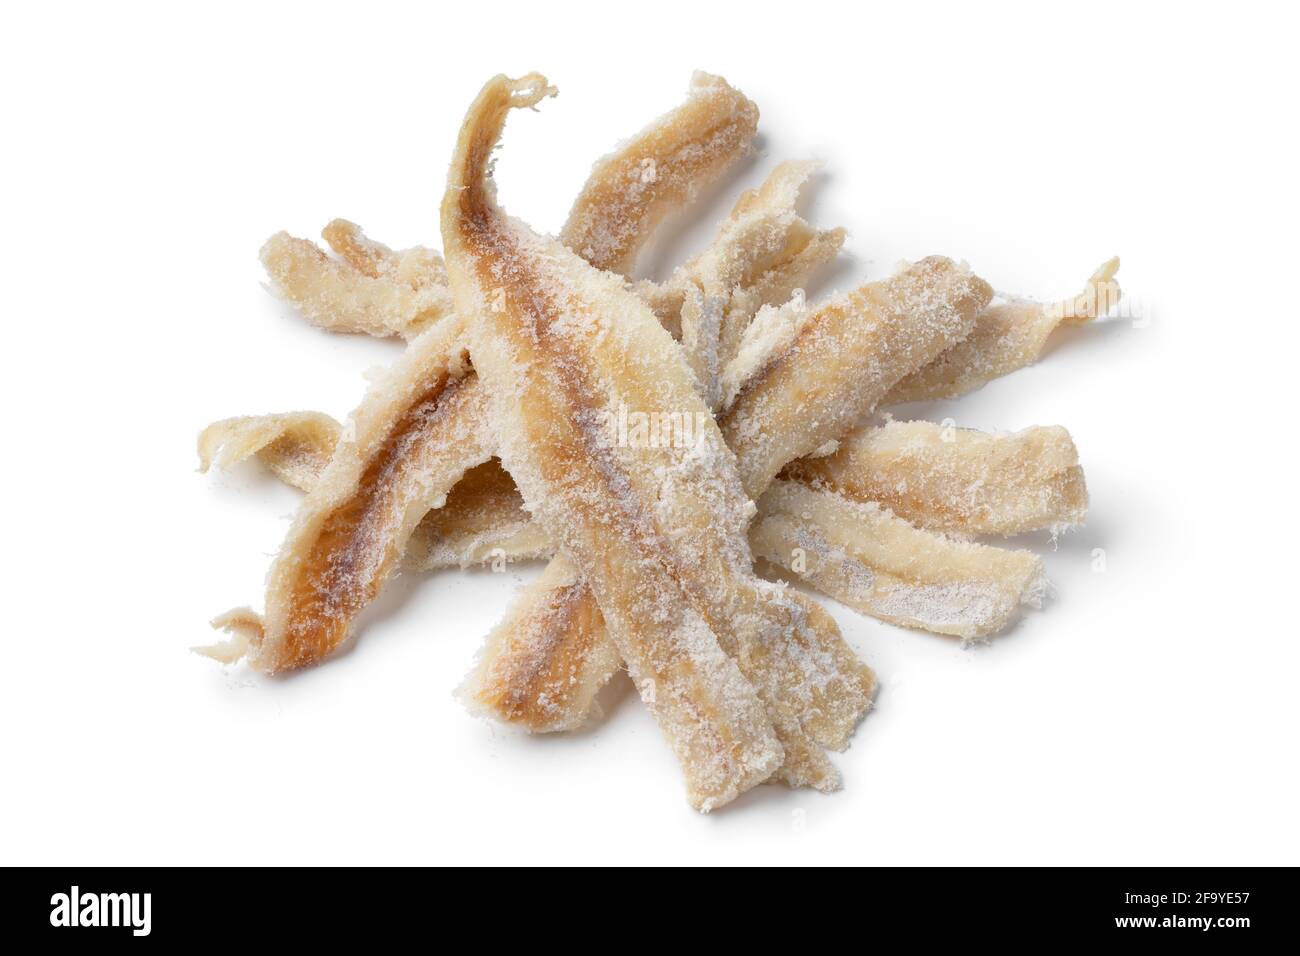 Heap of dried and salted cod fillets close up isolated on white background Stock Photo